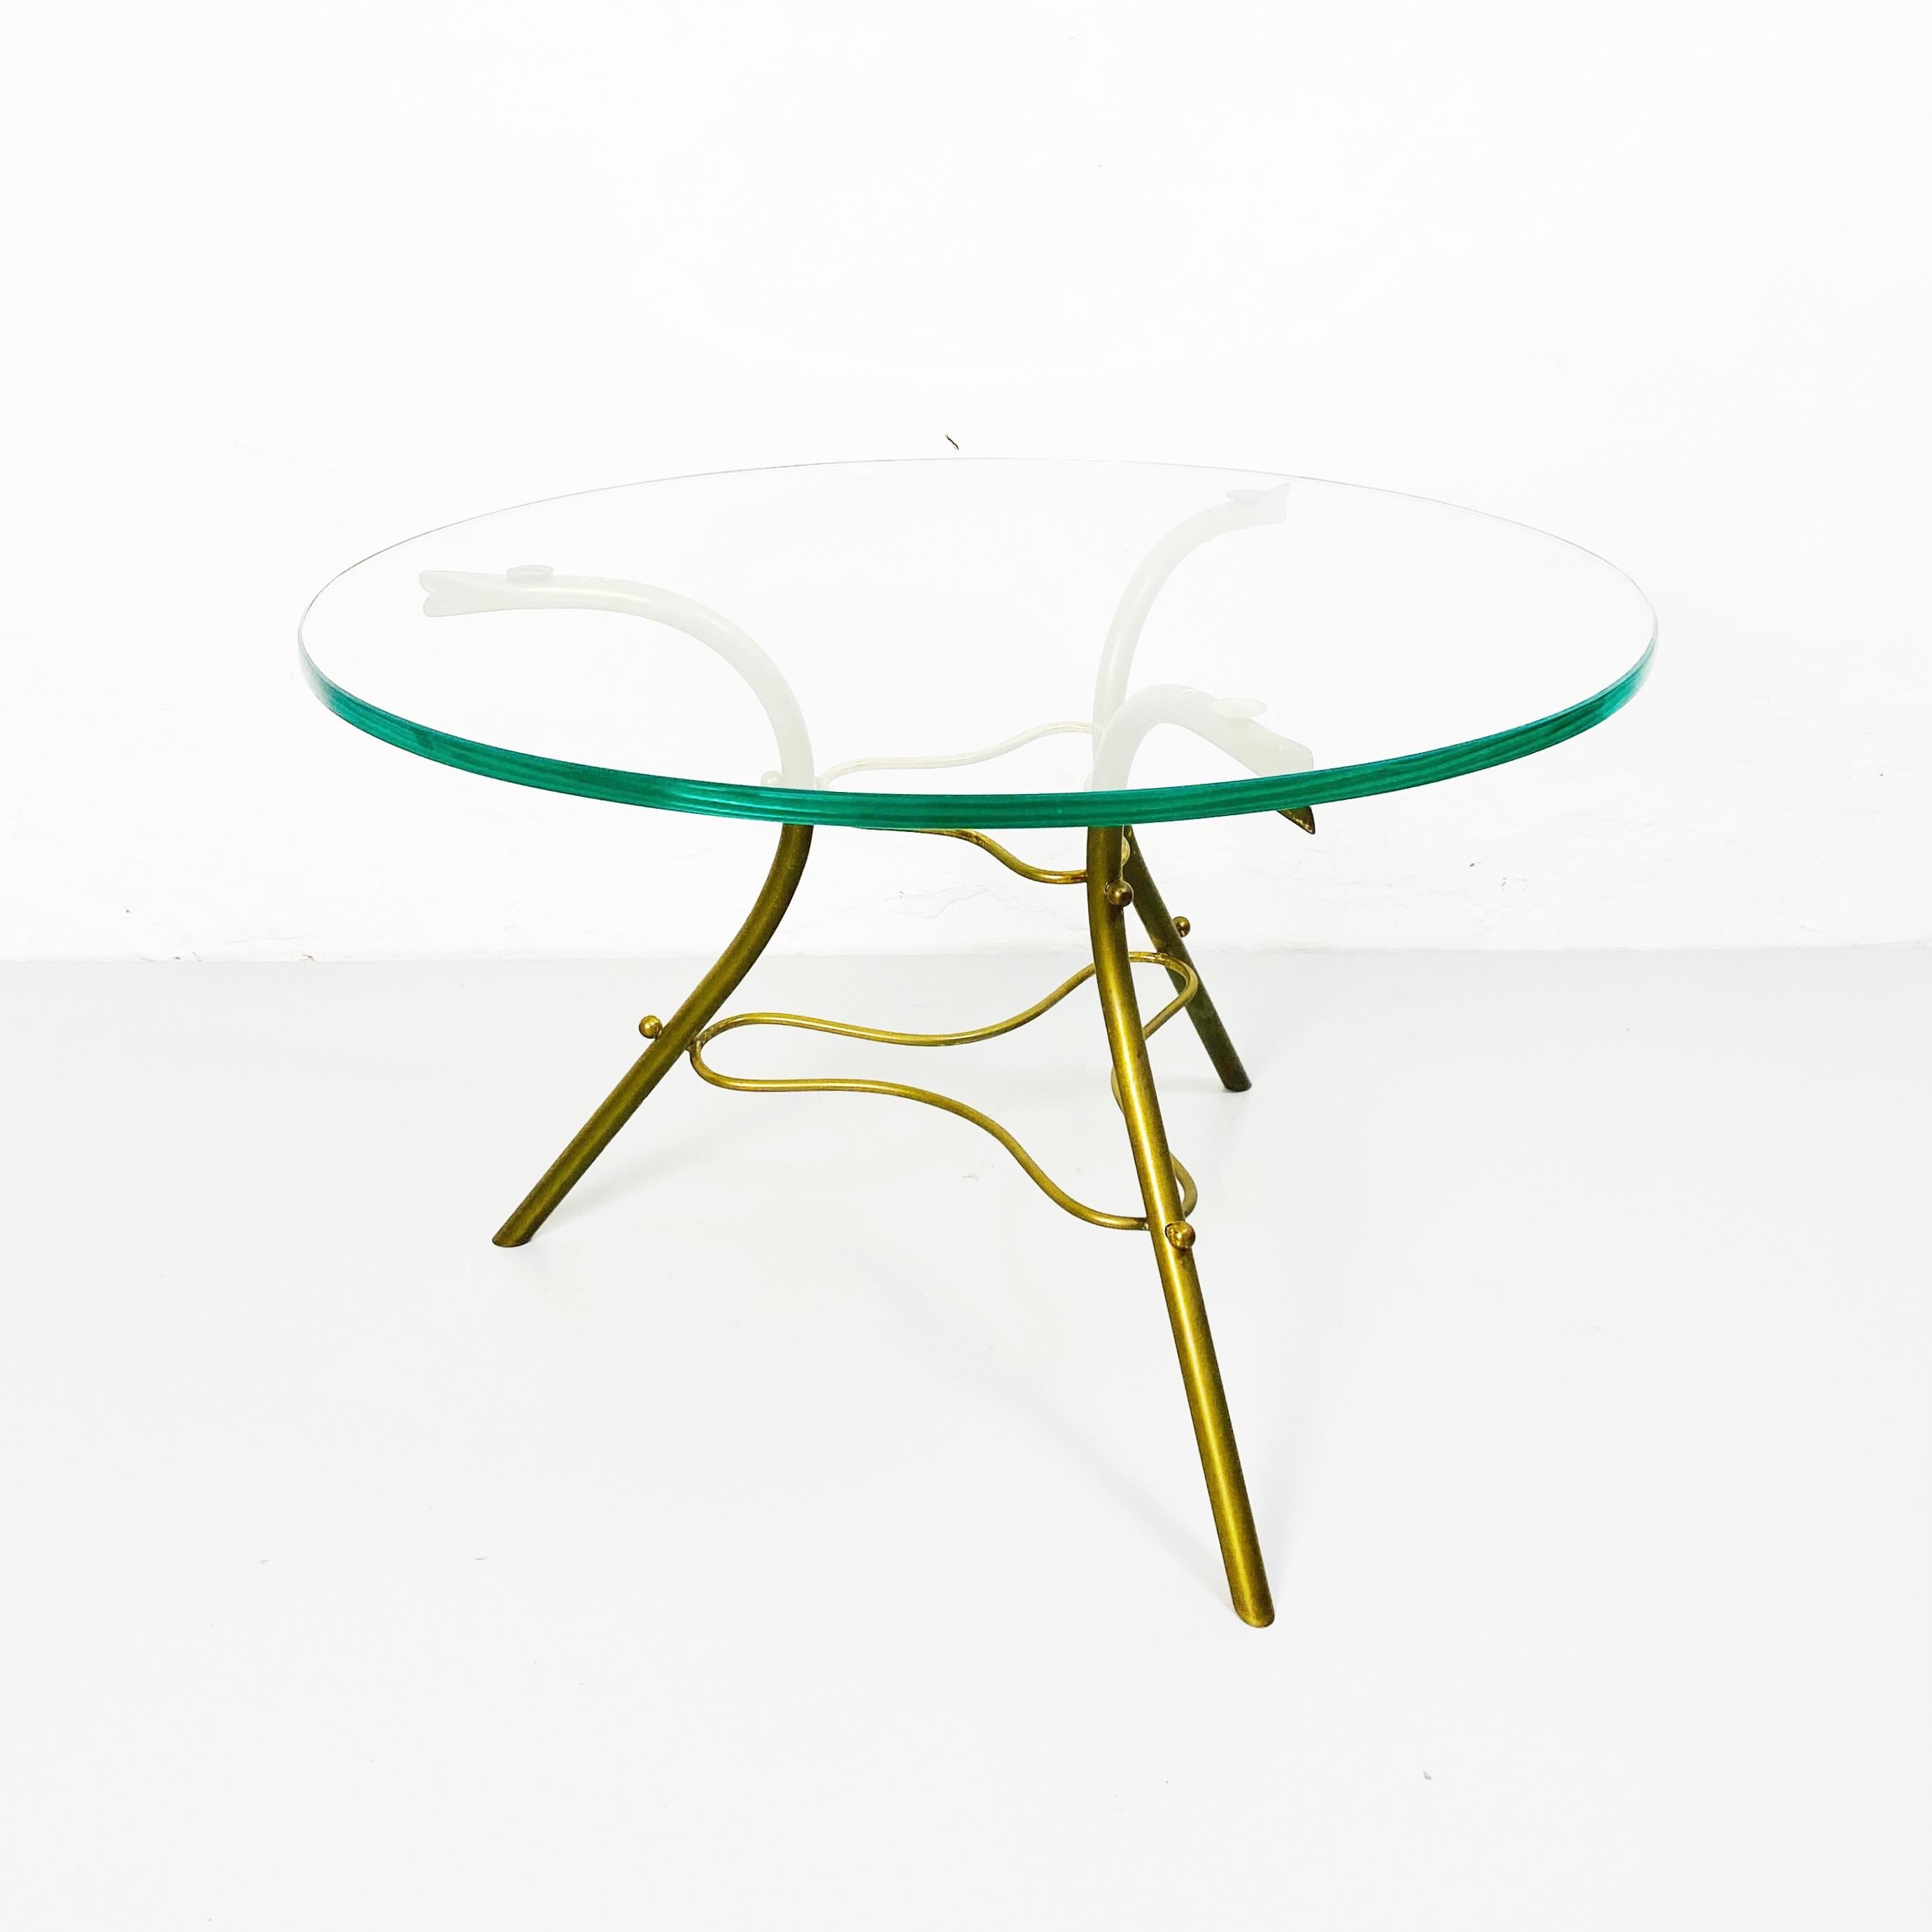 Italian Mid Century Round Coffee Table with Irregular Brass Road Base, 1950s For Sale 1